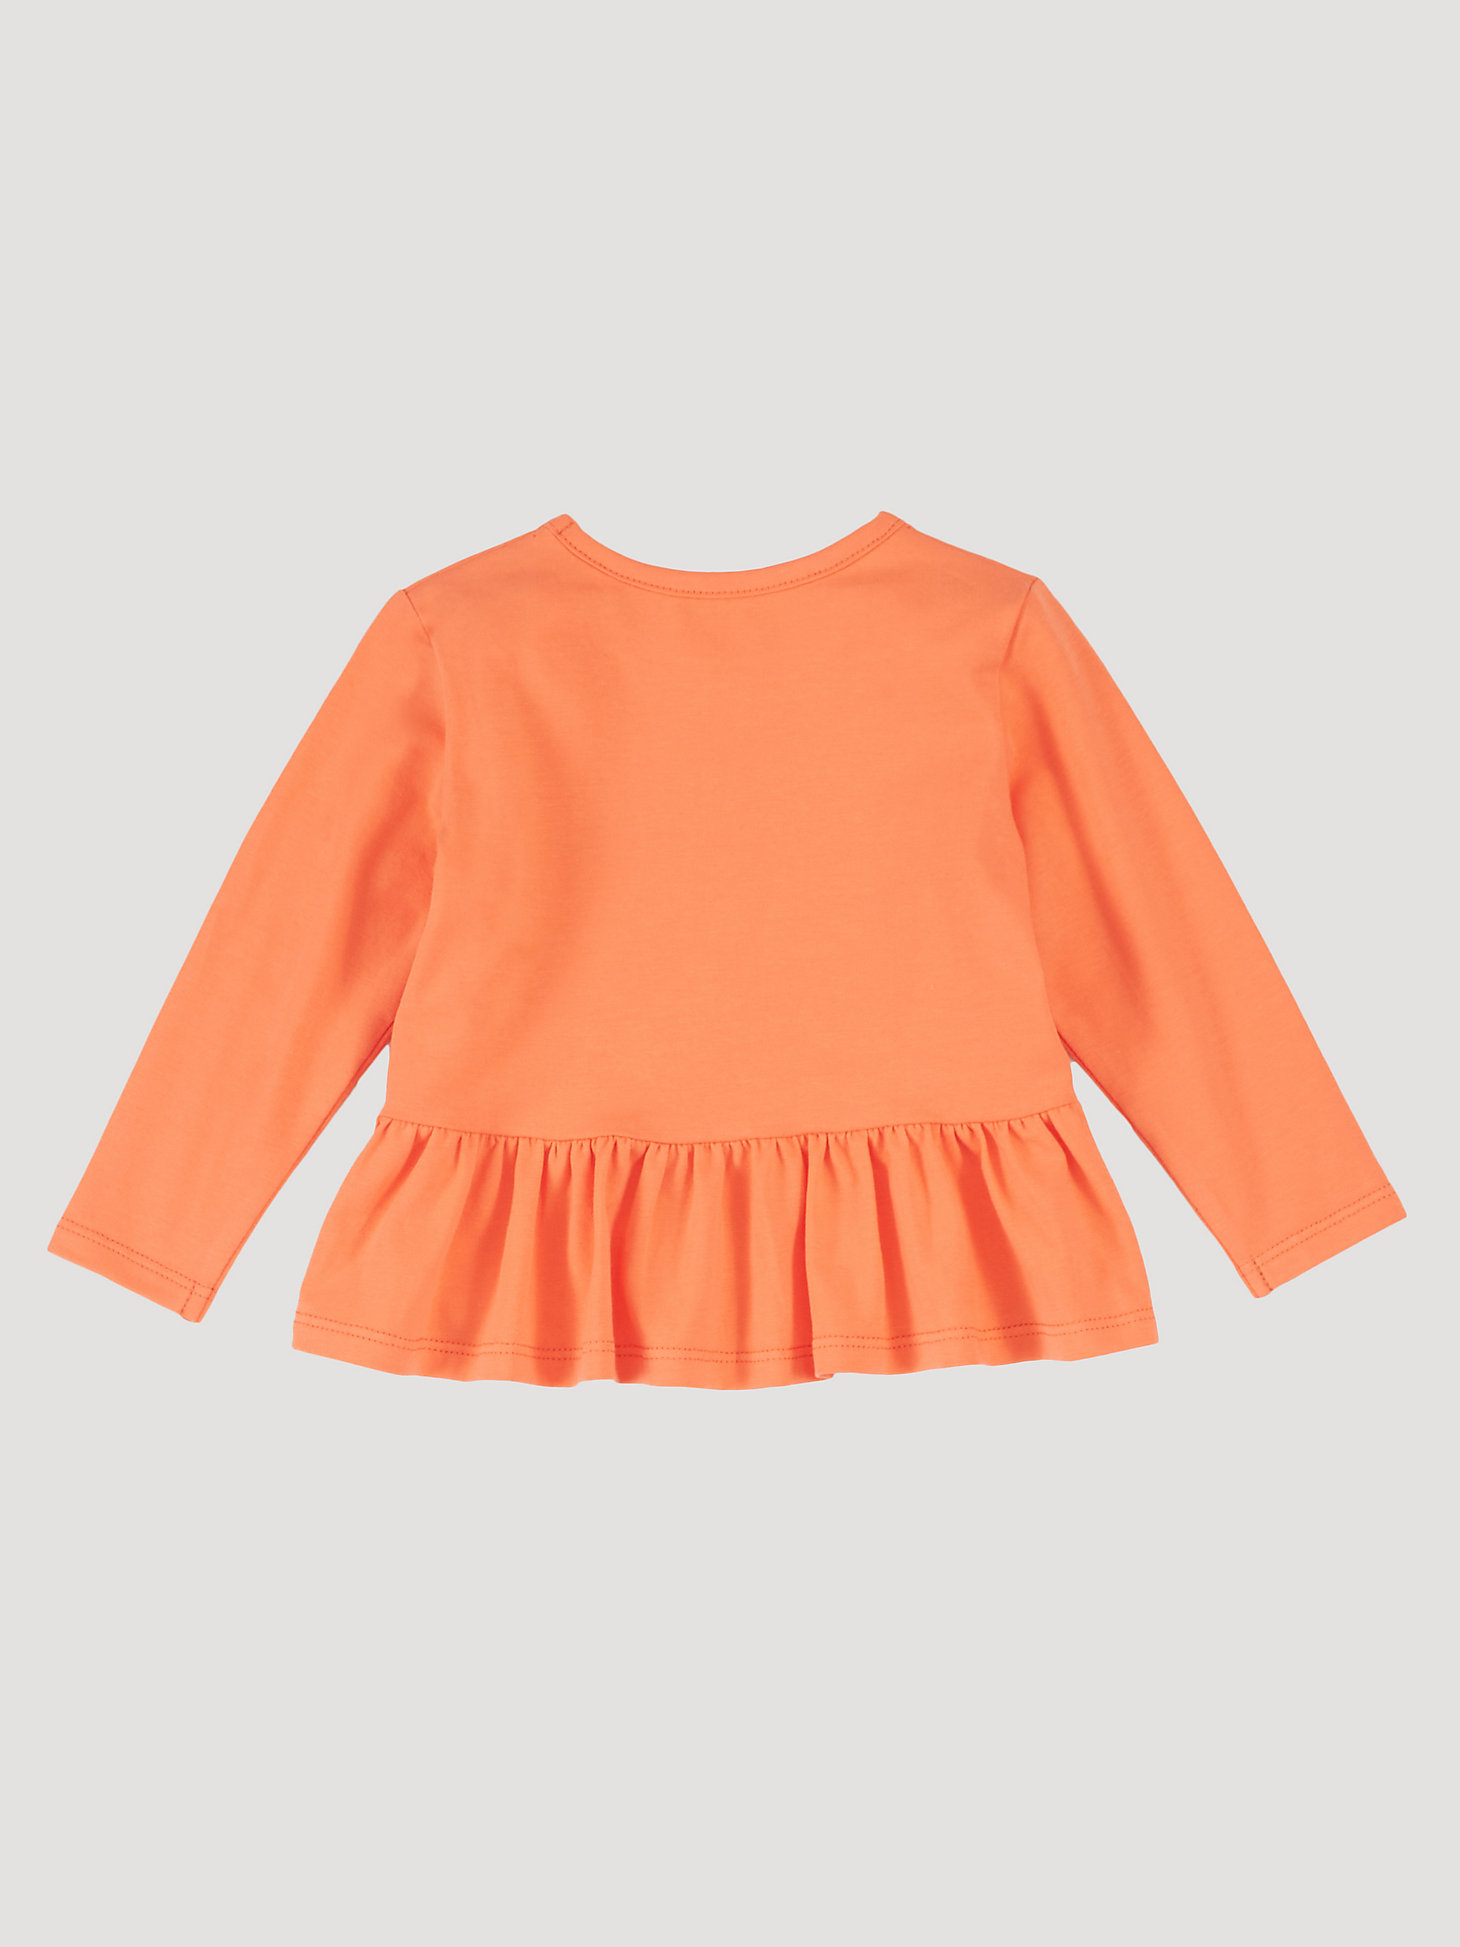 Toddler Girl Long Sleeve Rodeo Ready Graphic Tee in Orange alternative view 1